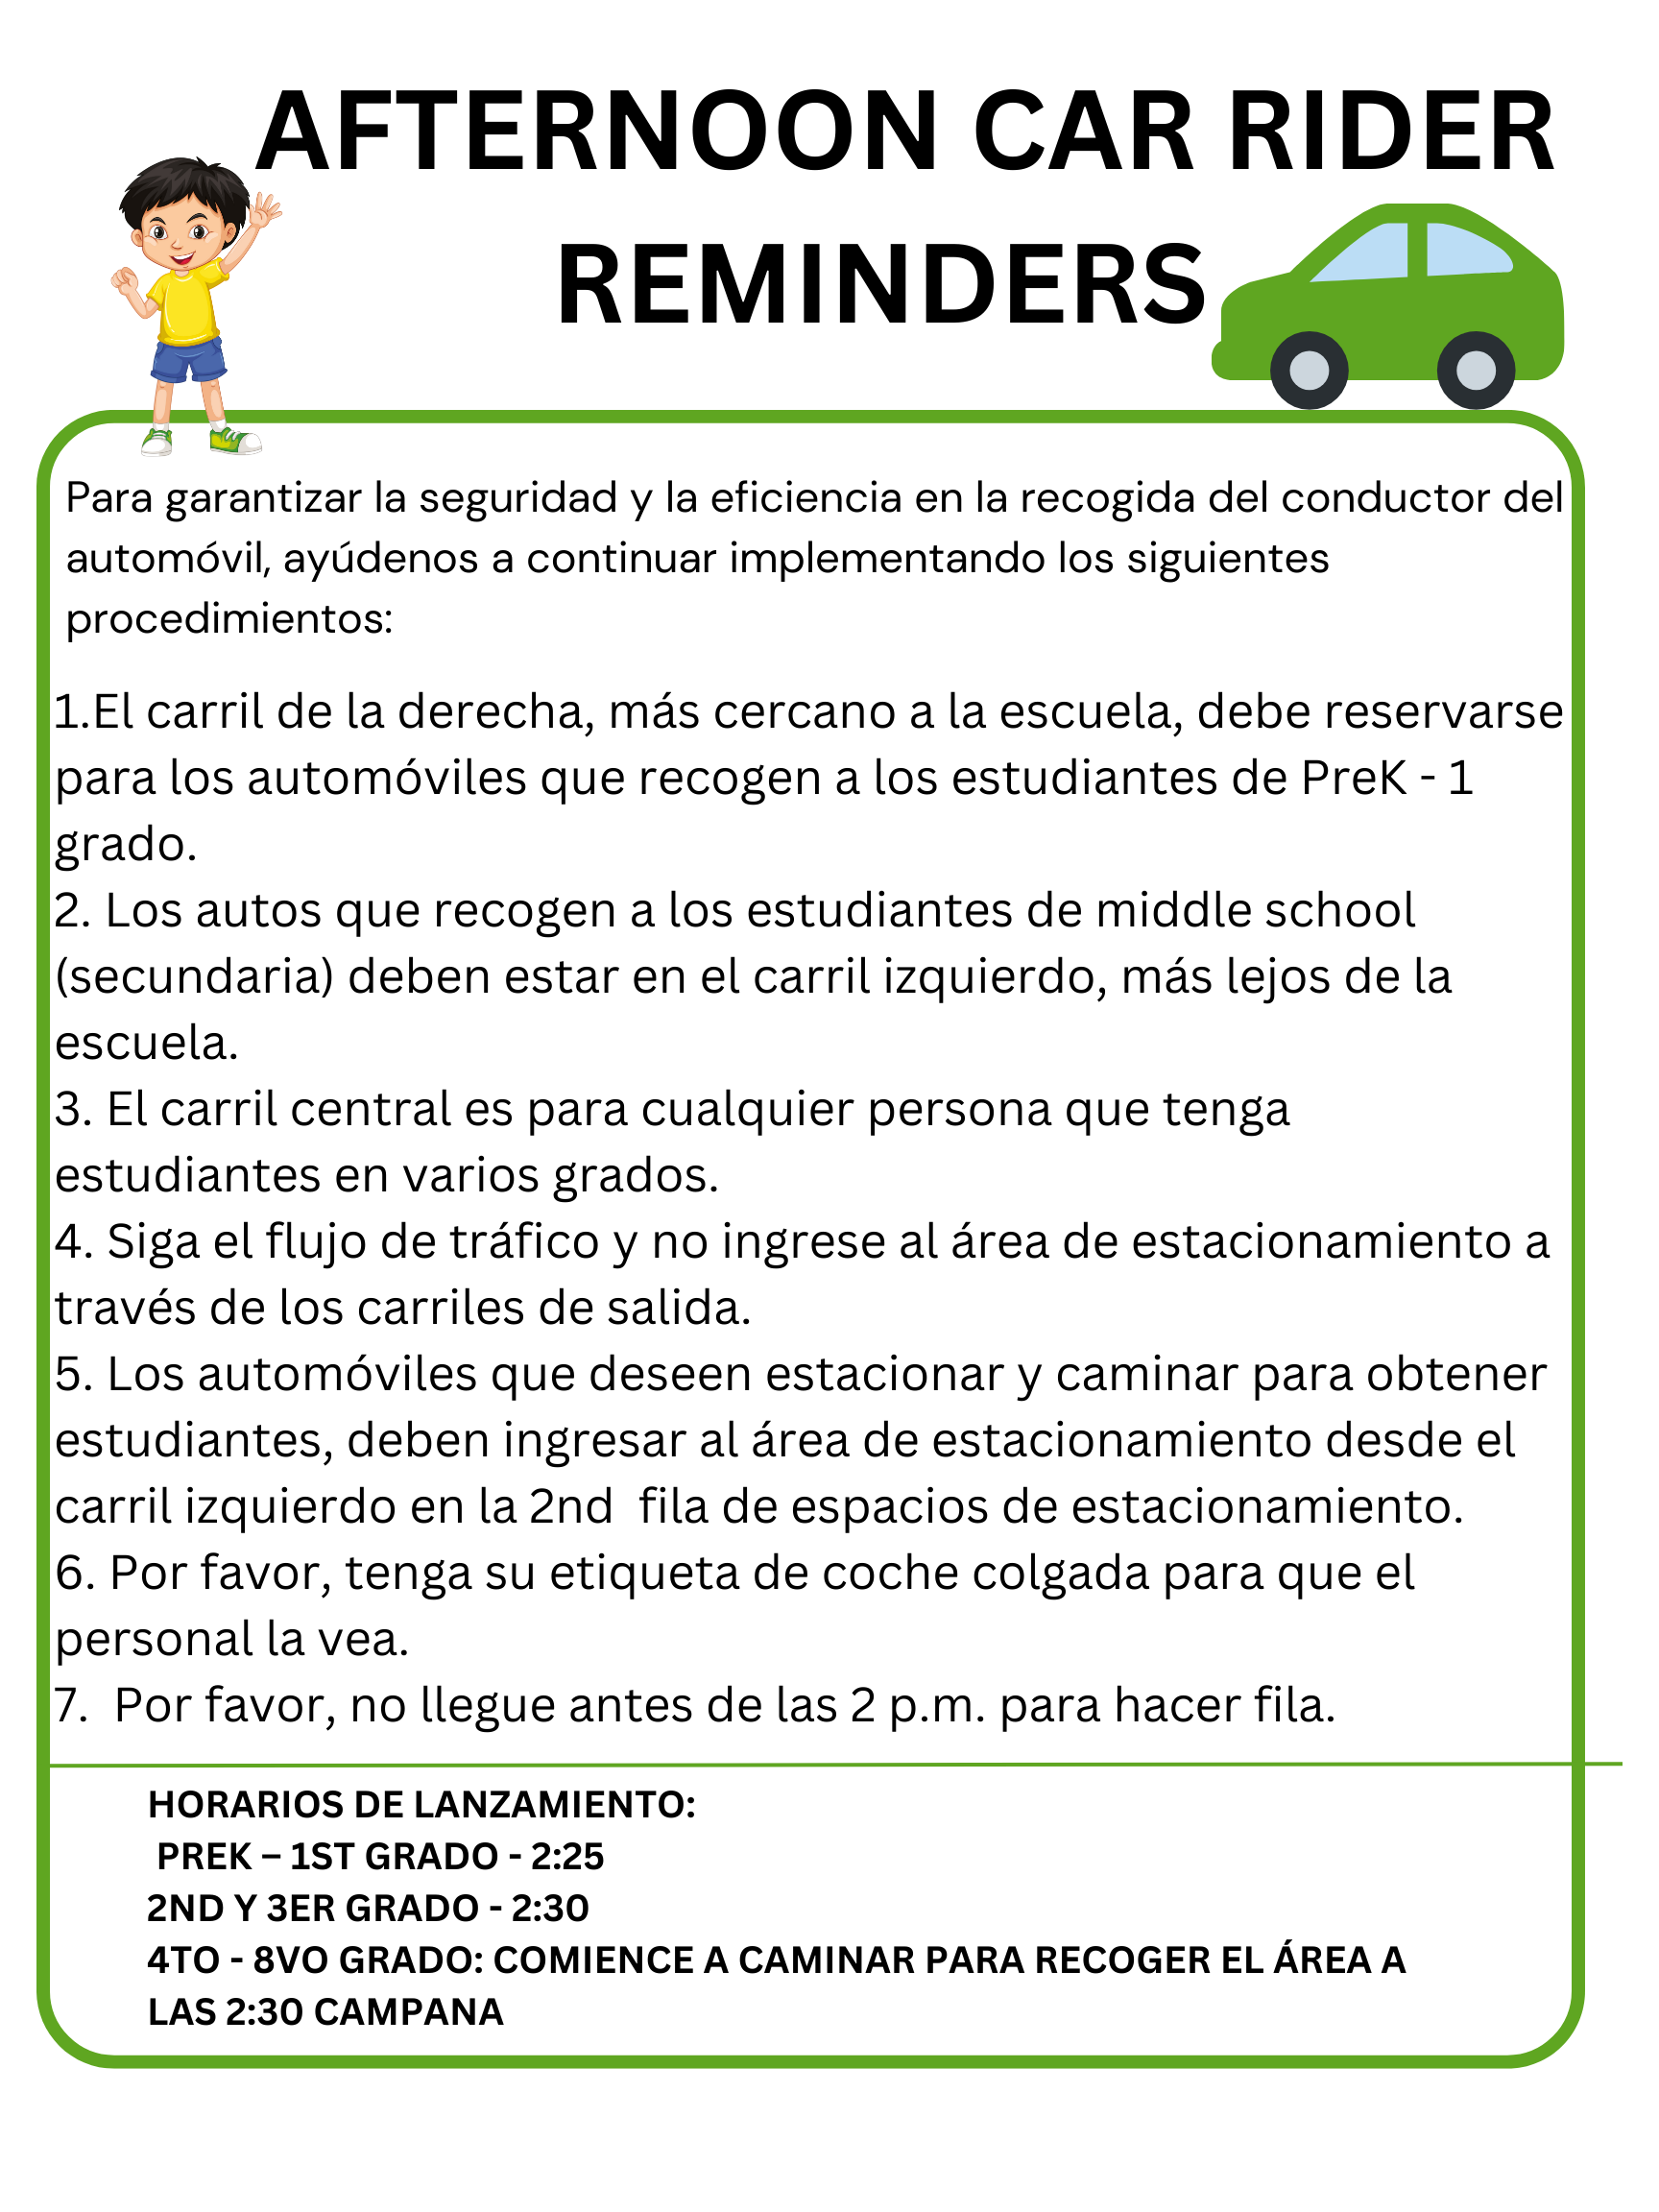 Afternoon Car Rider Reminders in Spanish